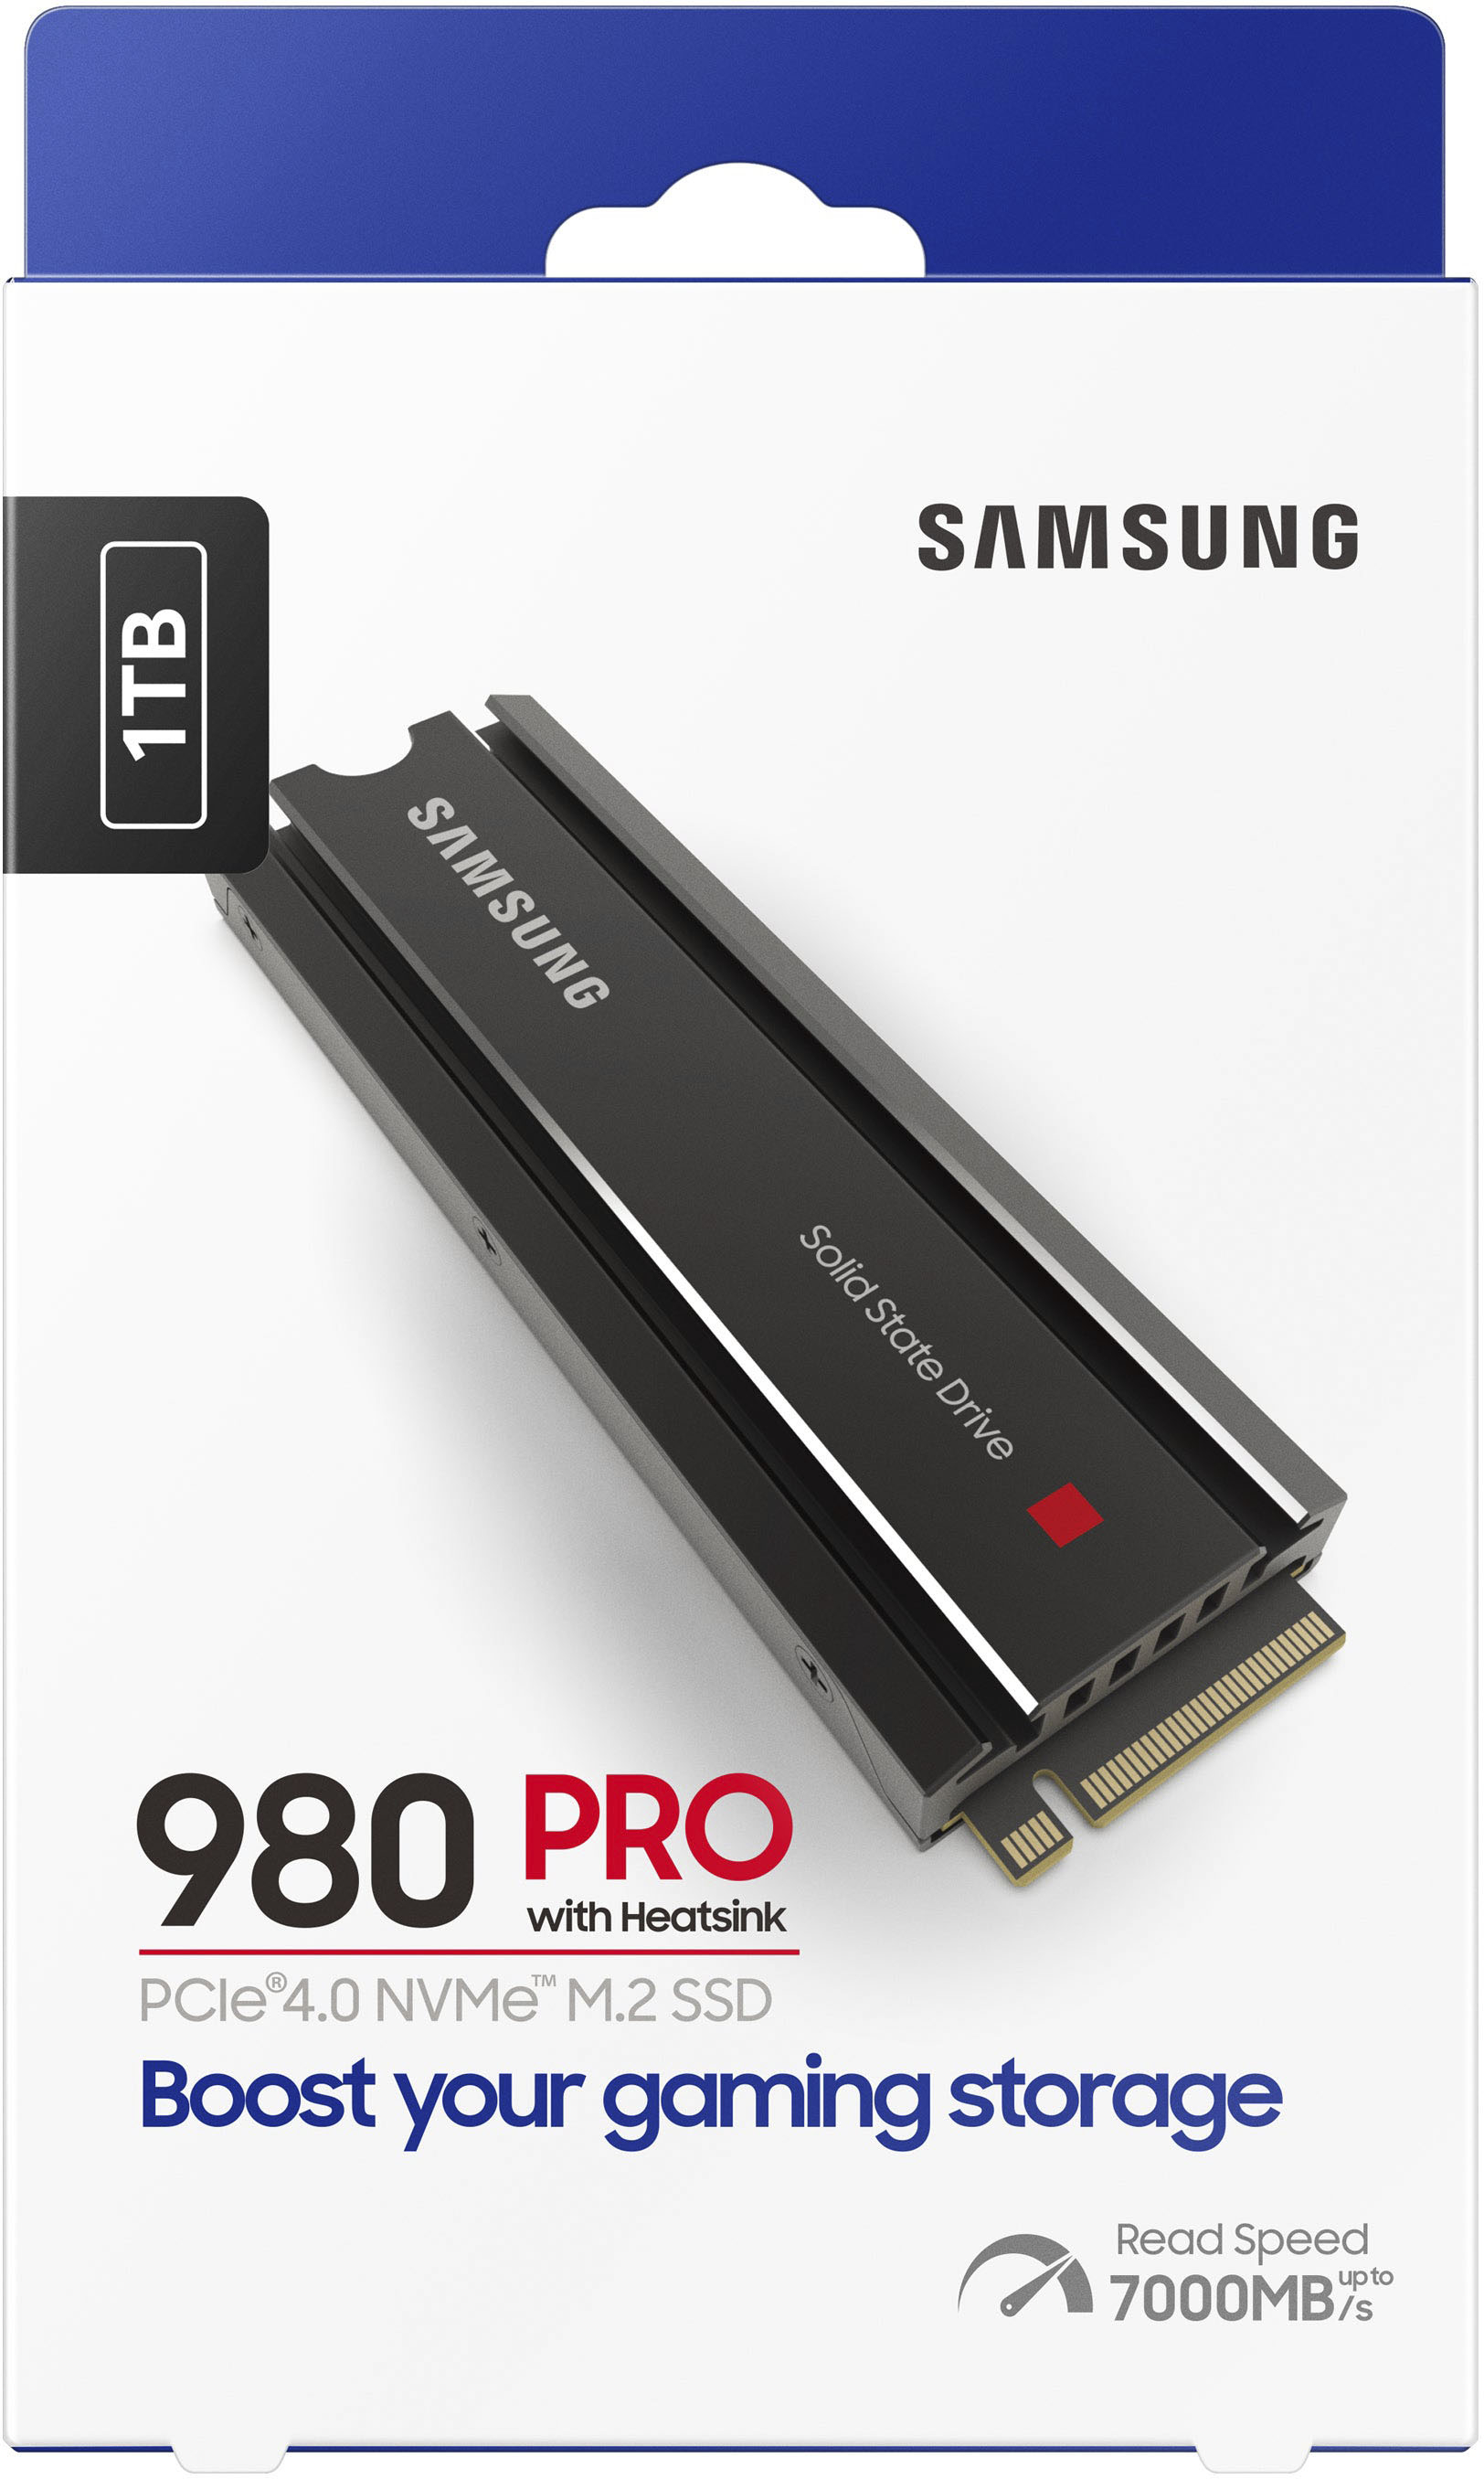 Samsung 980 PRO, PCIe 4.0 m.2 SSD with Heatsink for PS5 & PC, 1TB